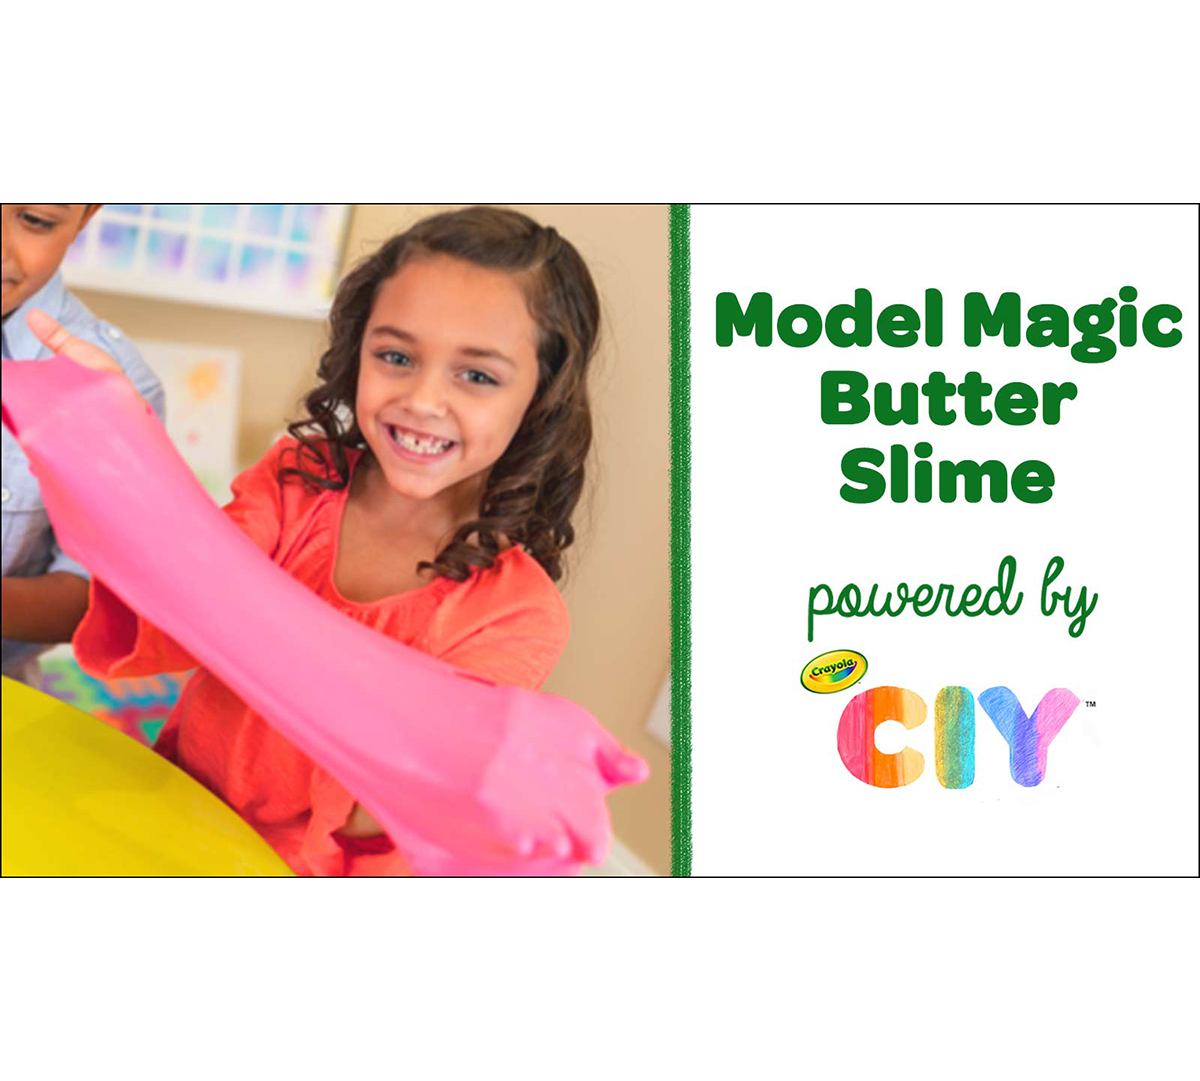 Model Magic Butter Slime Kit with Bonus Bag front view of included products 